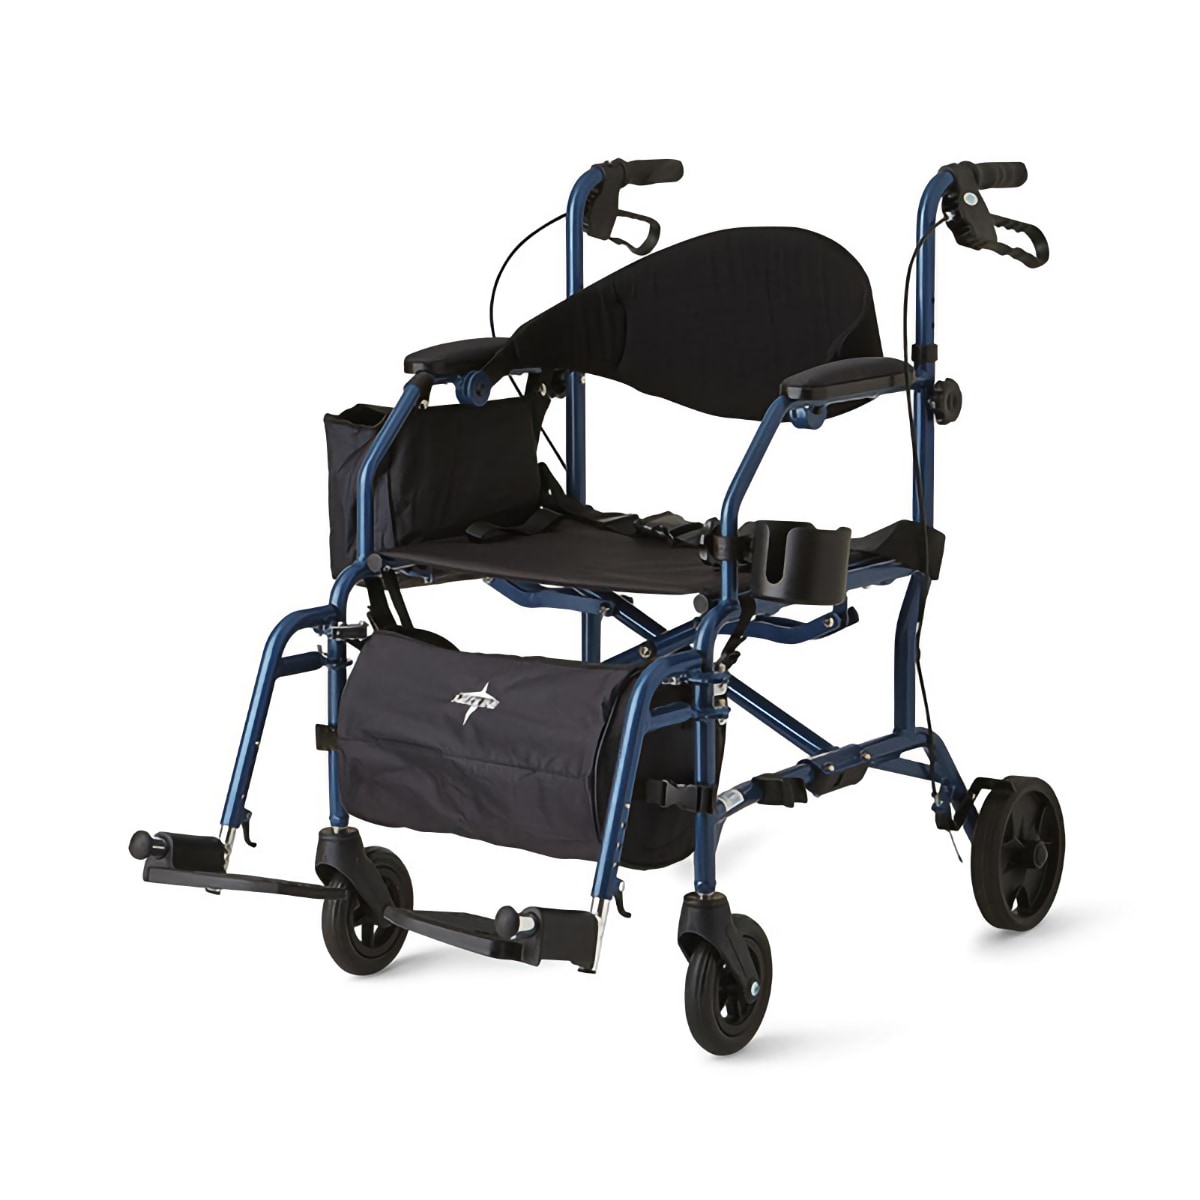 Medline Rollator & Transport Chair in one with black design and 4 smaller wheels